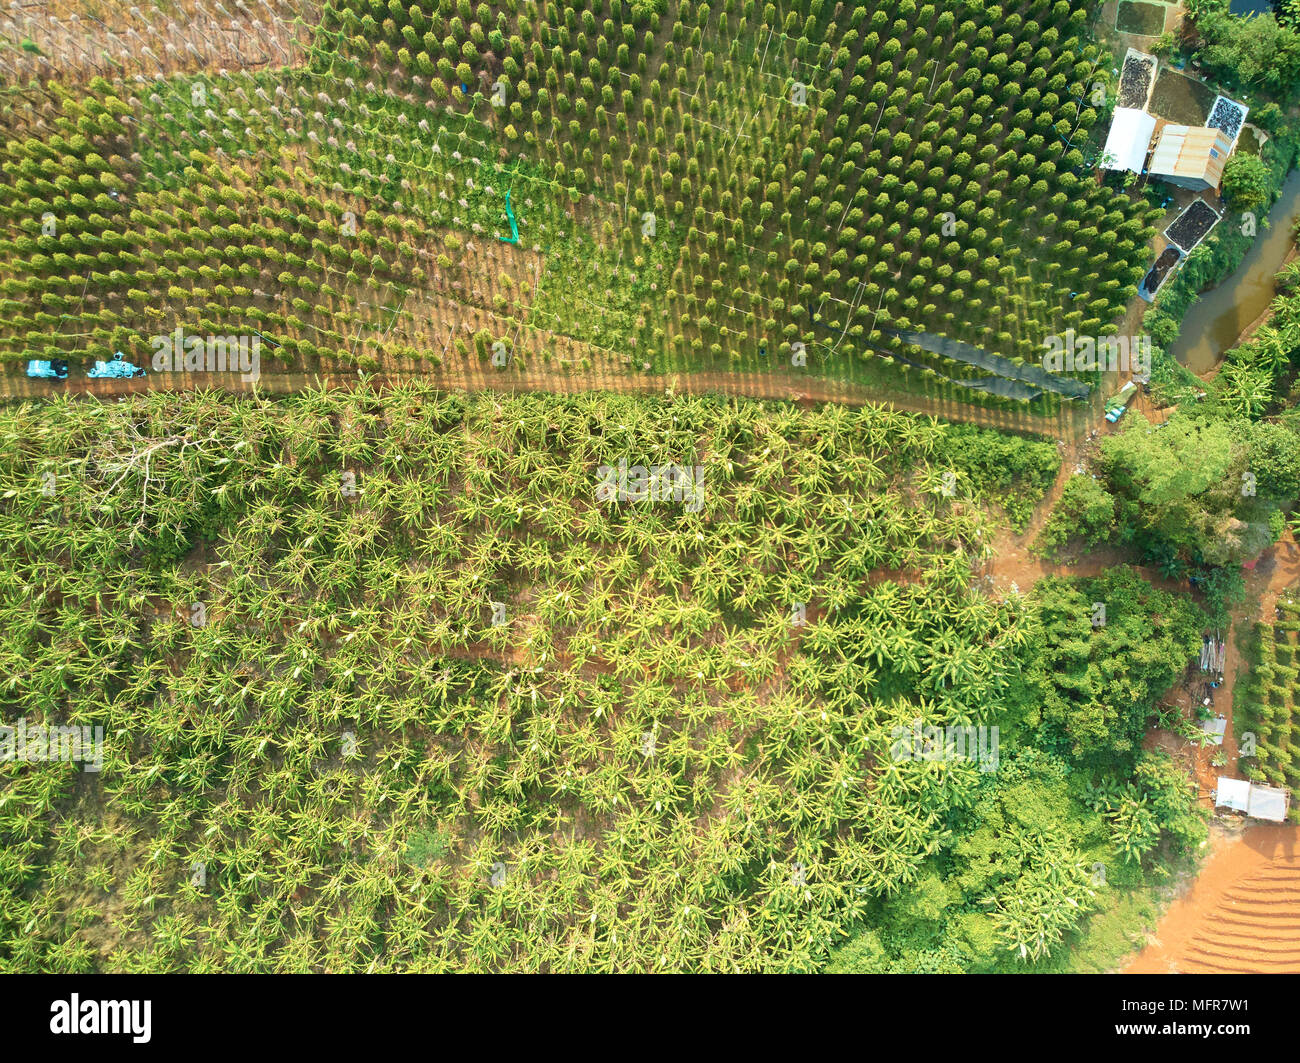 Aerial drone view of countryside cambodia Stock Photo